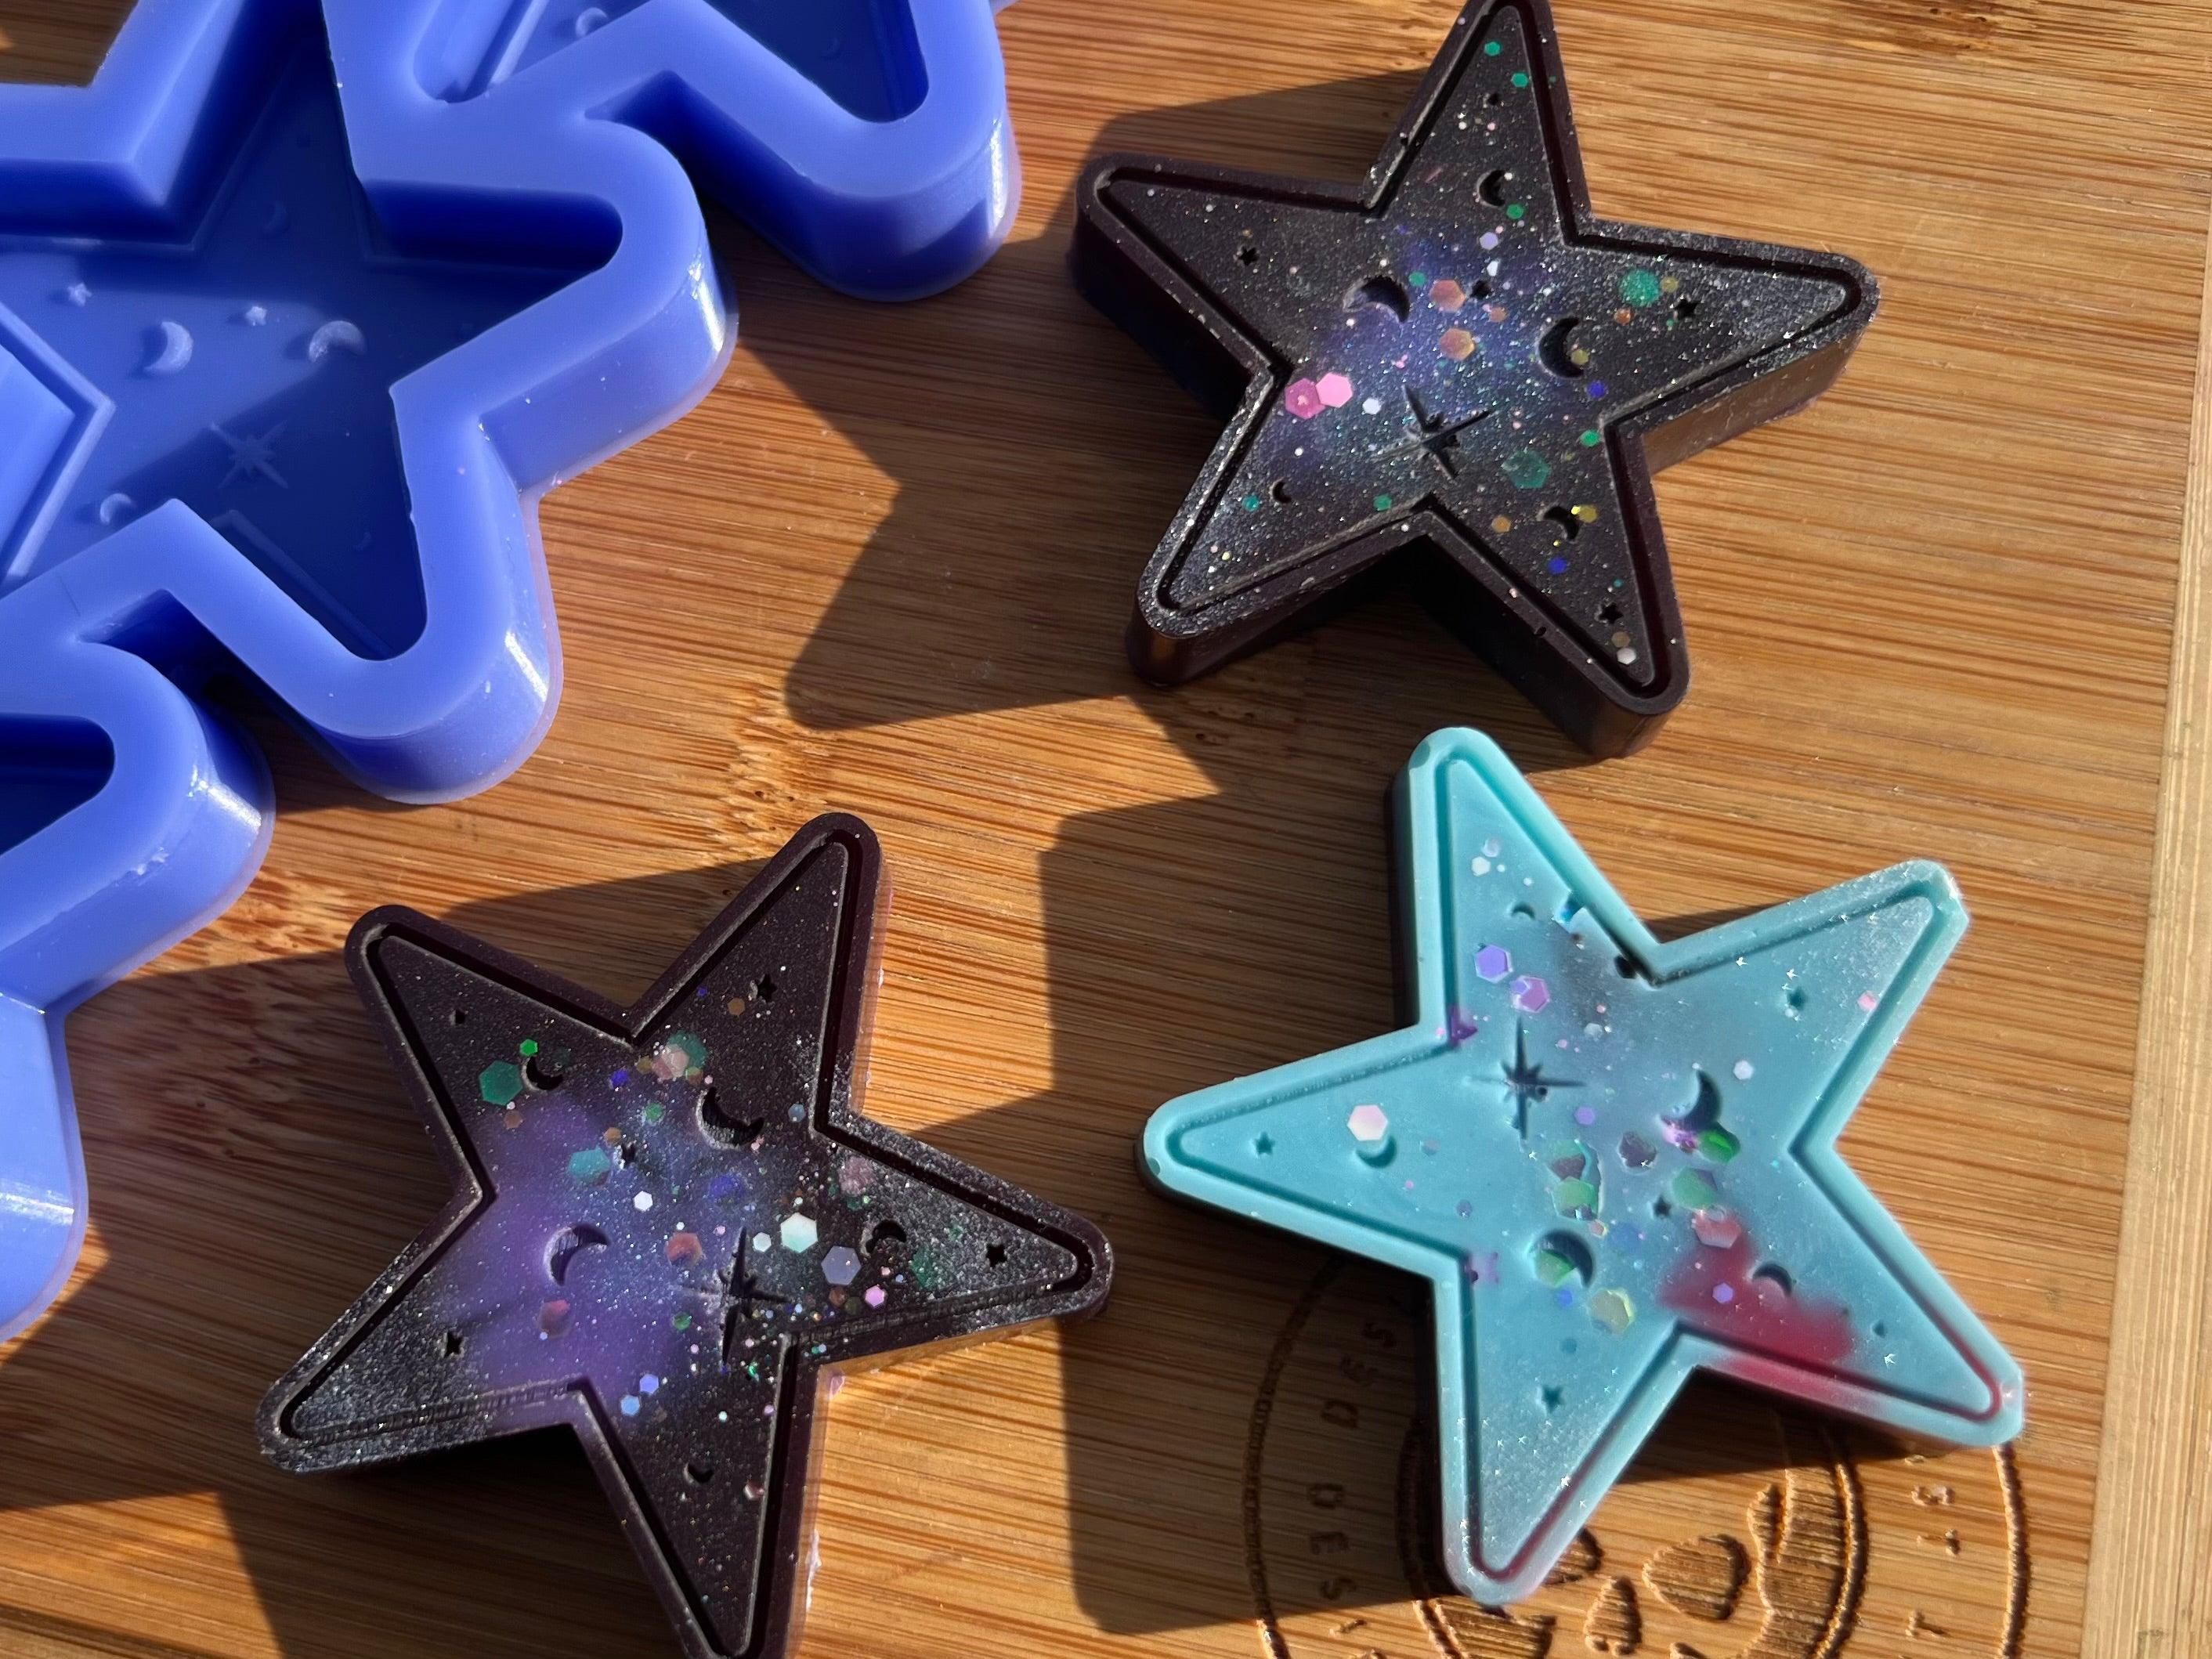 Celestial Star Silicone Mold - Designed with a Twist - Top quality silicone molds made in the UK.